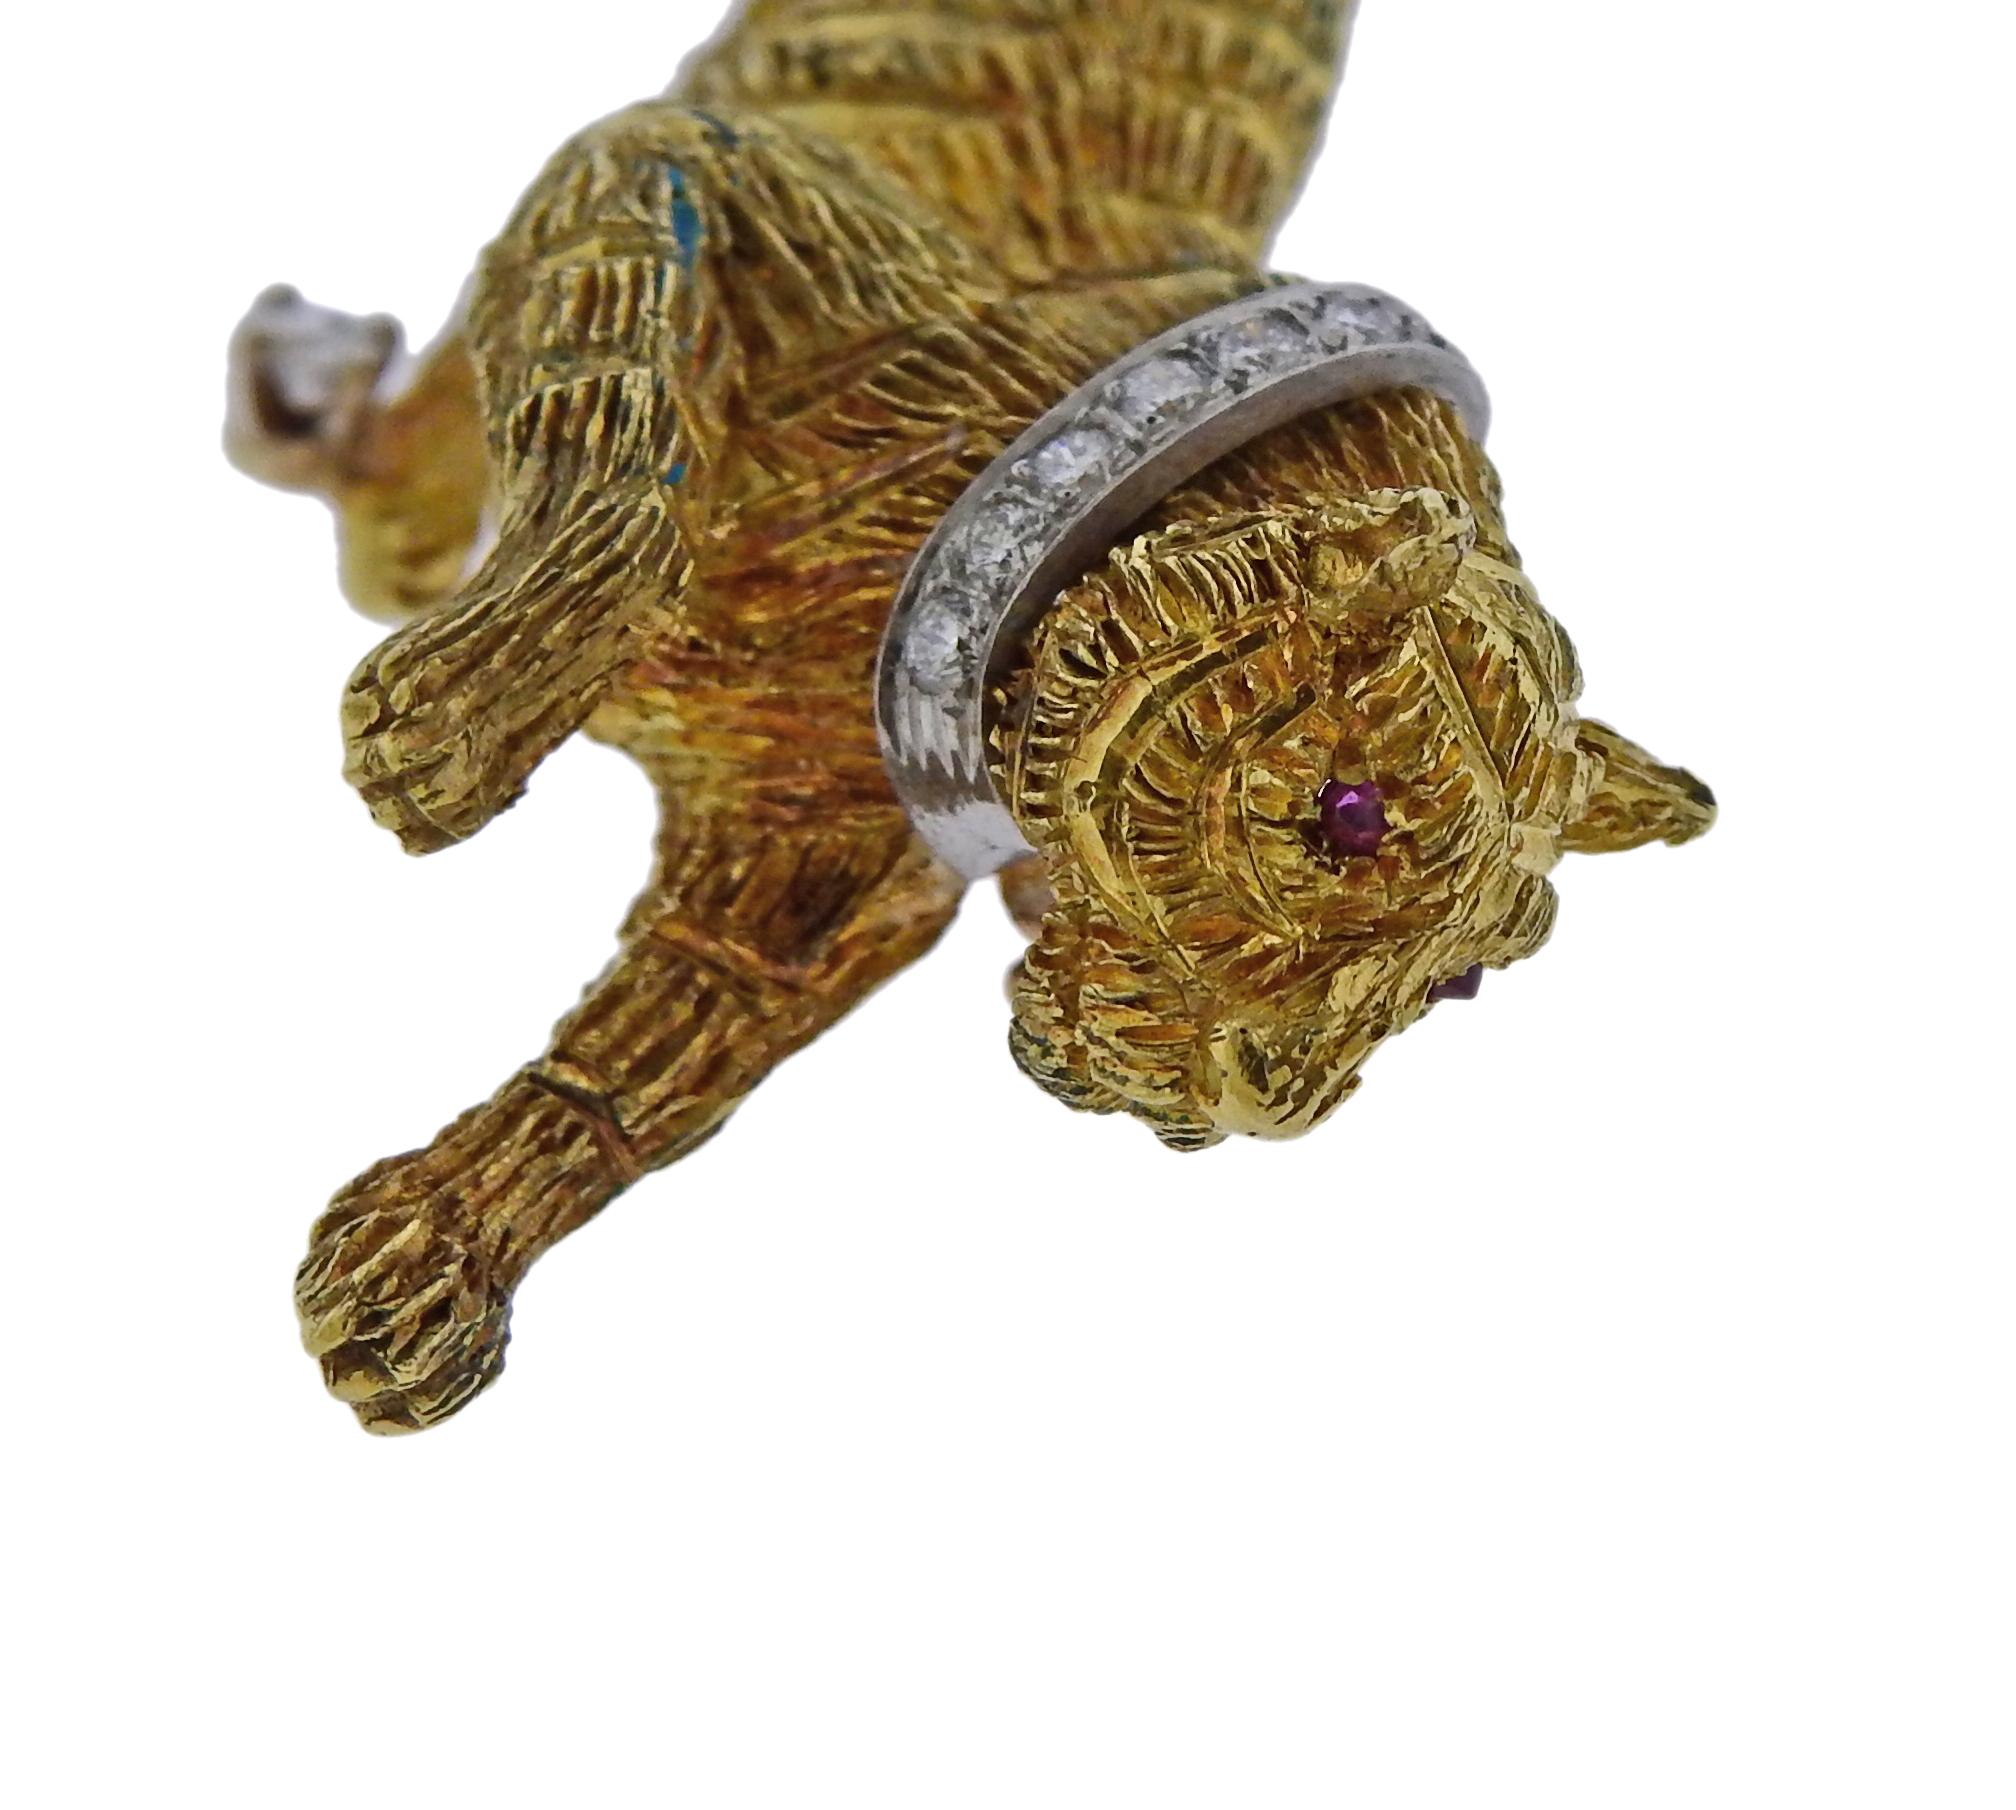 18k gold tiger brooch, set with ruby eyes and diamond color, set with approx. 0.12ctw in G/VS diamonds. Crafted by Tiffany & Co, Comes with a copy of original purchase receipt. Brooch is 50mm x 26mm and weighs 16.4 grams. Marked Tiffany & Co, 18k.  